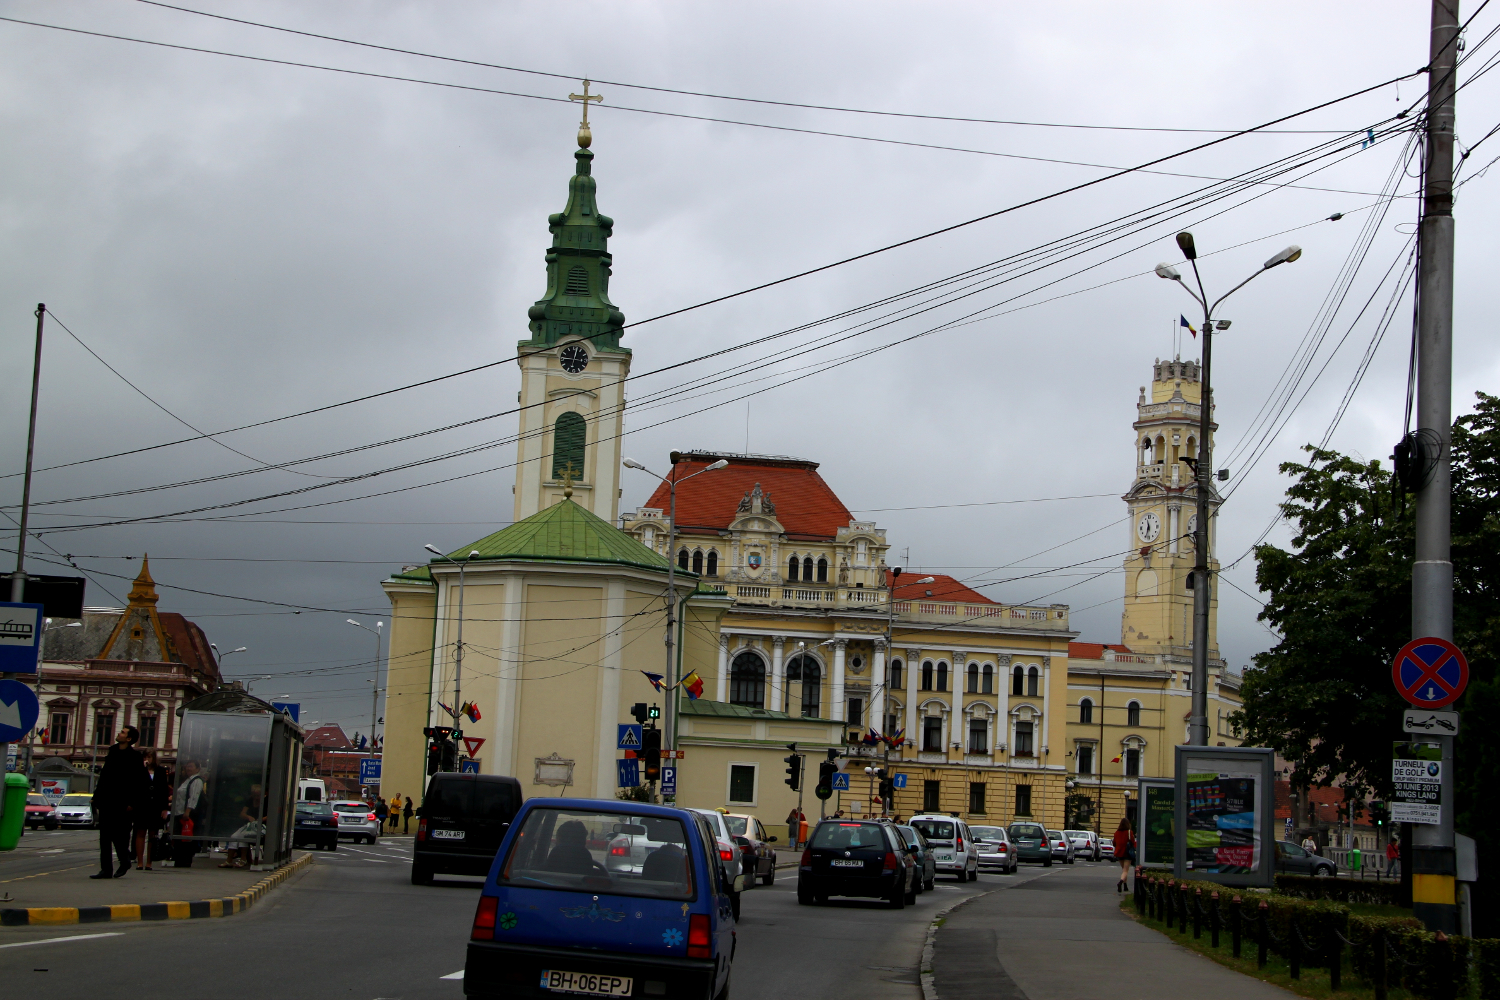 Church in Oradea and a sky with many cables